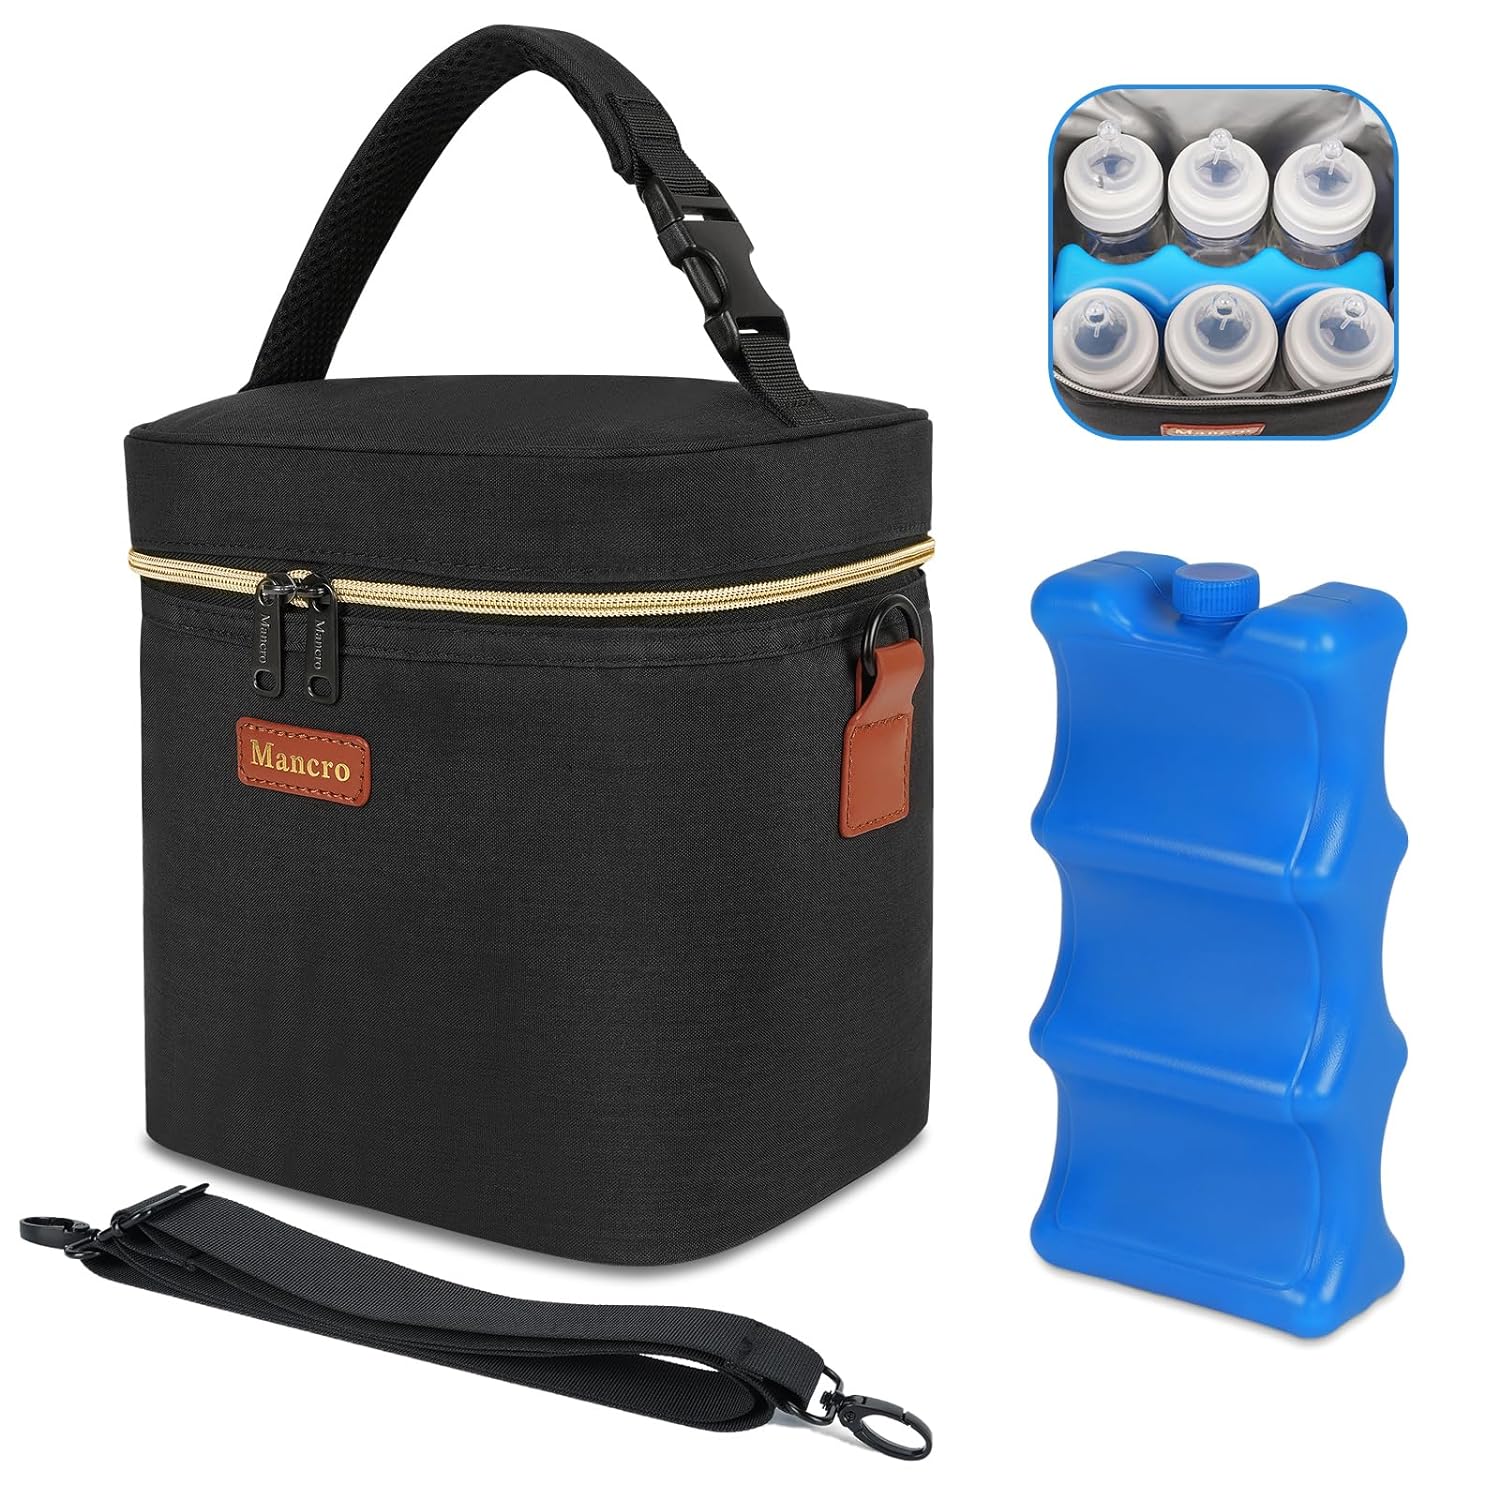 This is the best Bottle Cooler we own. It comes with the perfect ice pack and it great for hauling back and forth from daycare. The zipper works great and is smooth to open/close multiple times a day and every week. I also love the quality of the cooler. the inside it easy to clean and not cheap material. The outside is stylish and can also be clipped on the side of the car seat if you don't have extra hands to hold it. would recommend to others